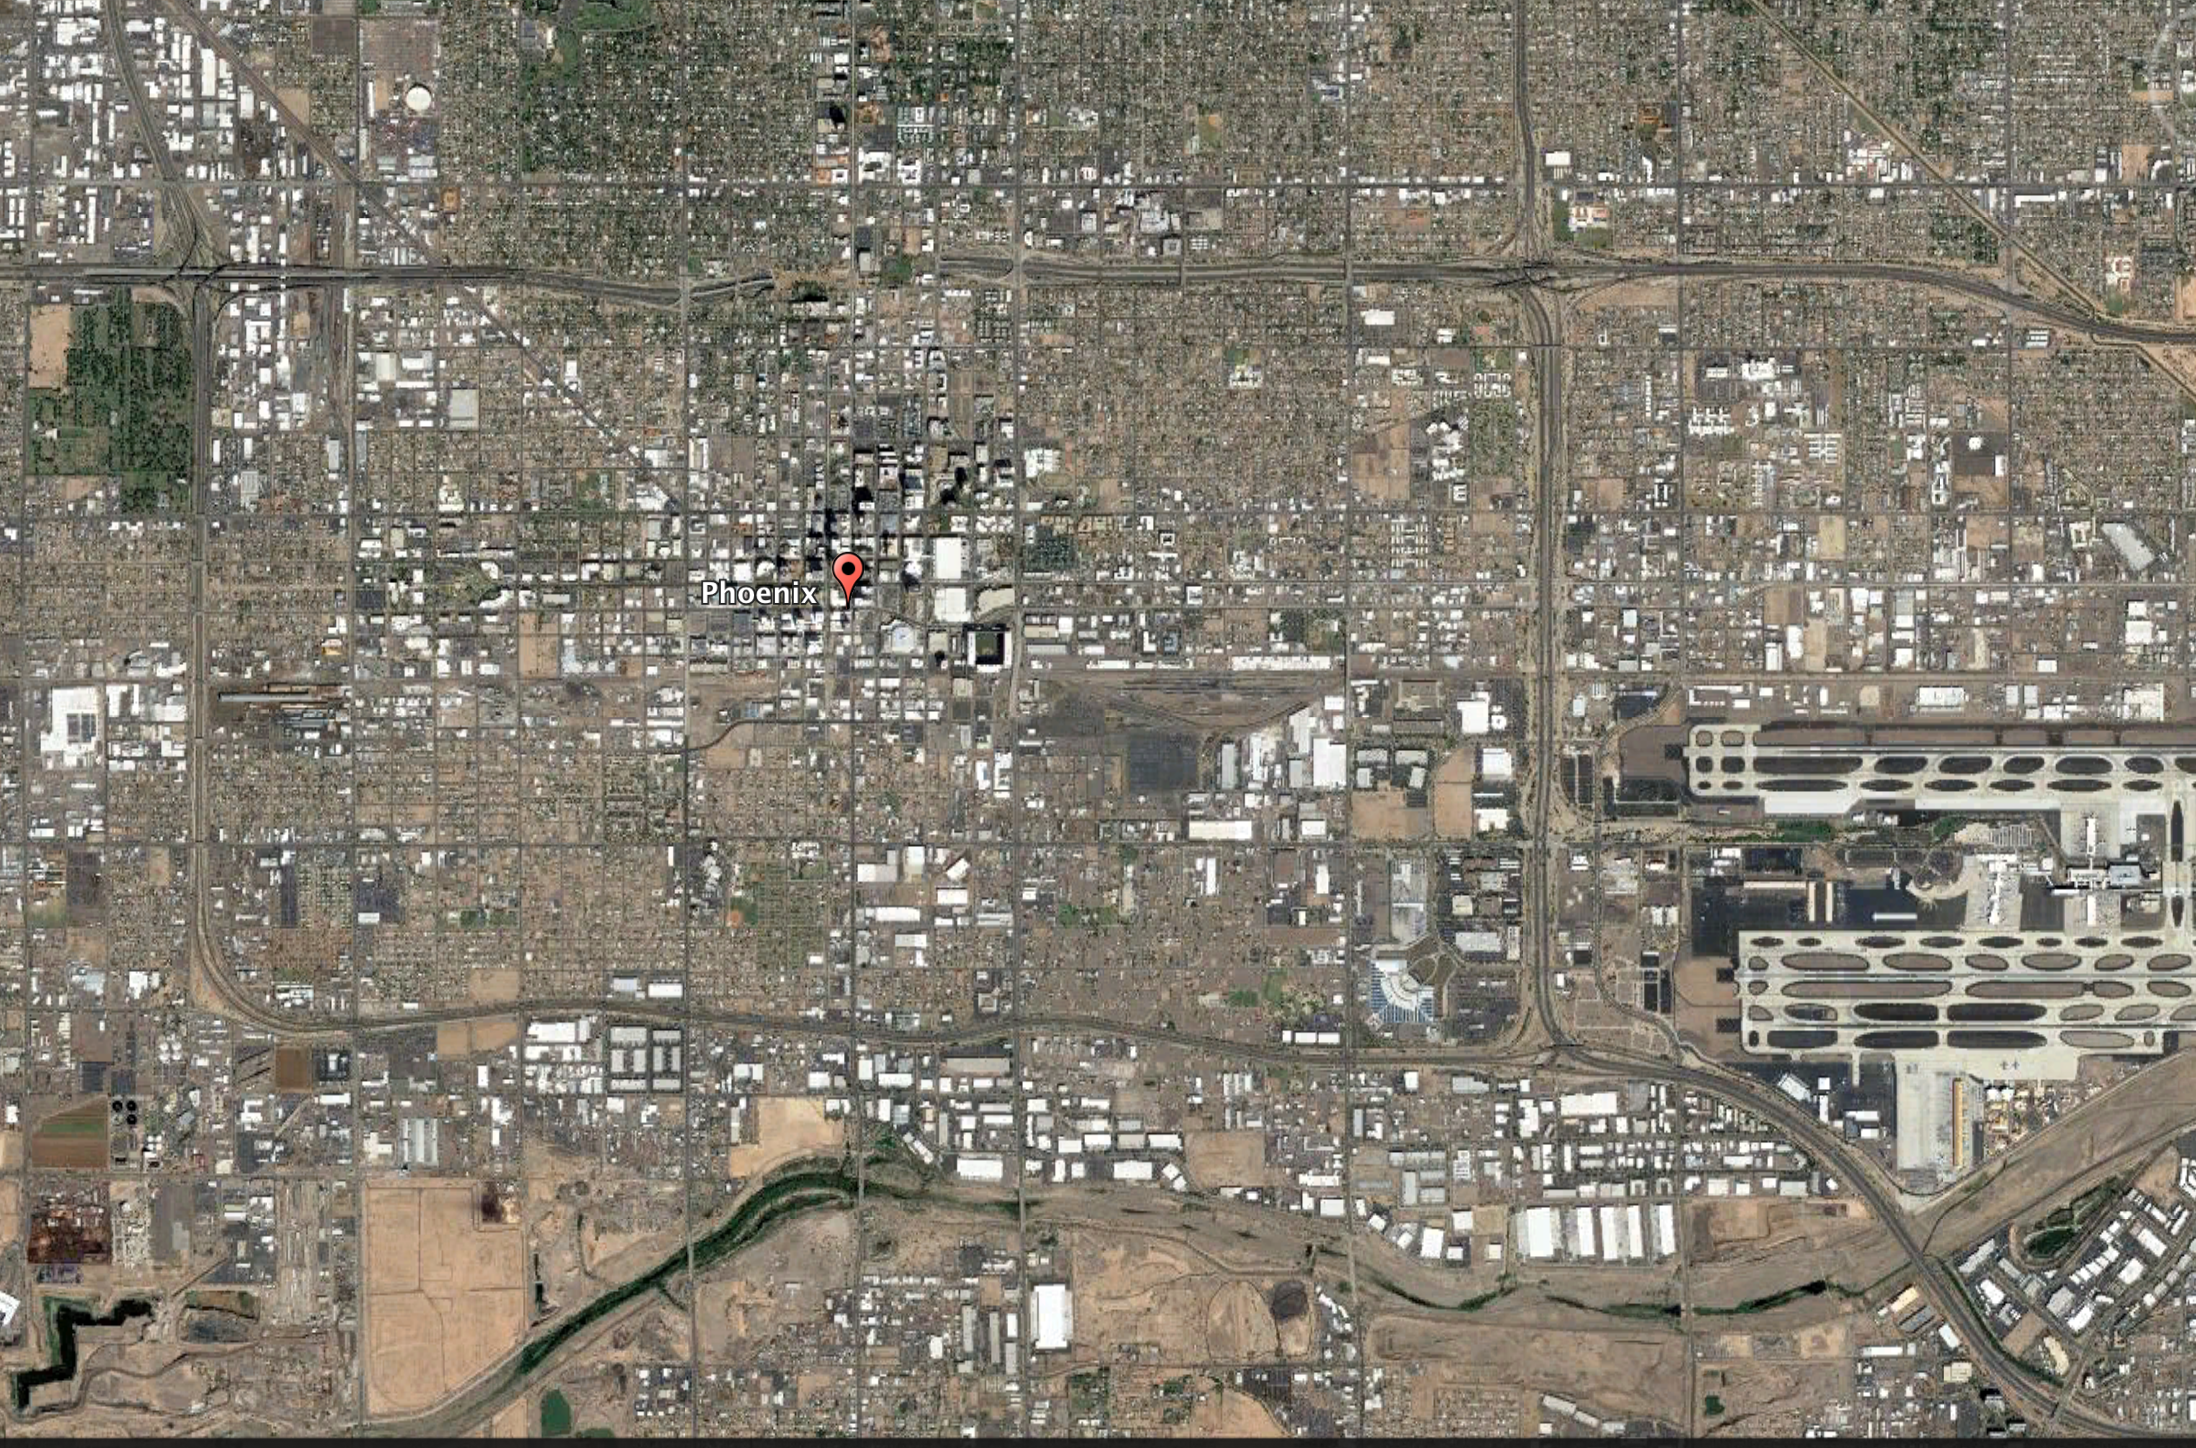 The city of Phoenix viewed from above